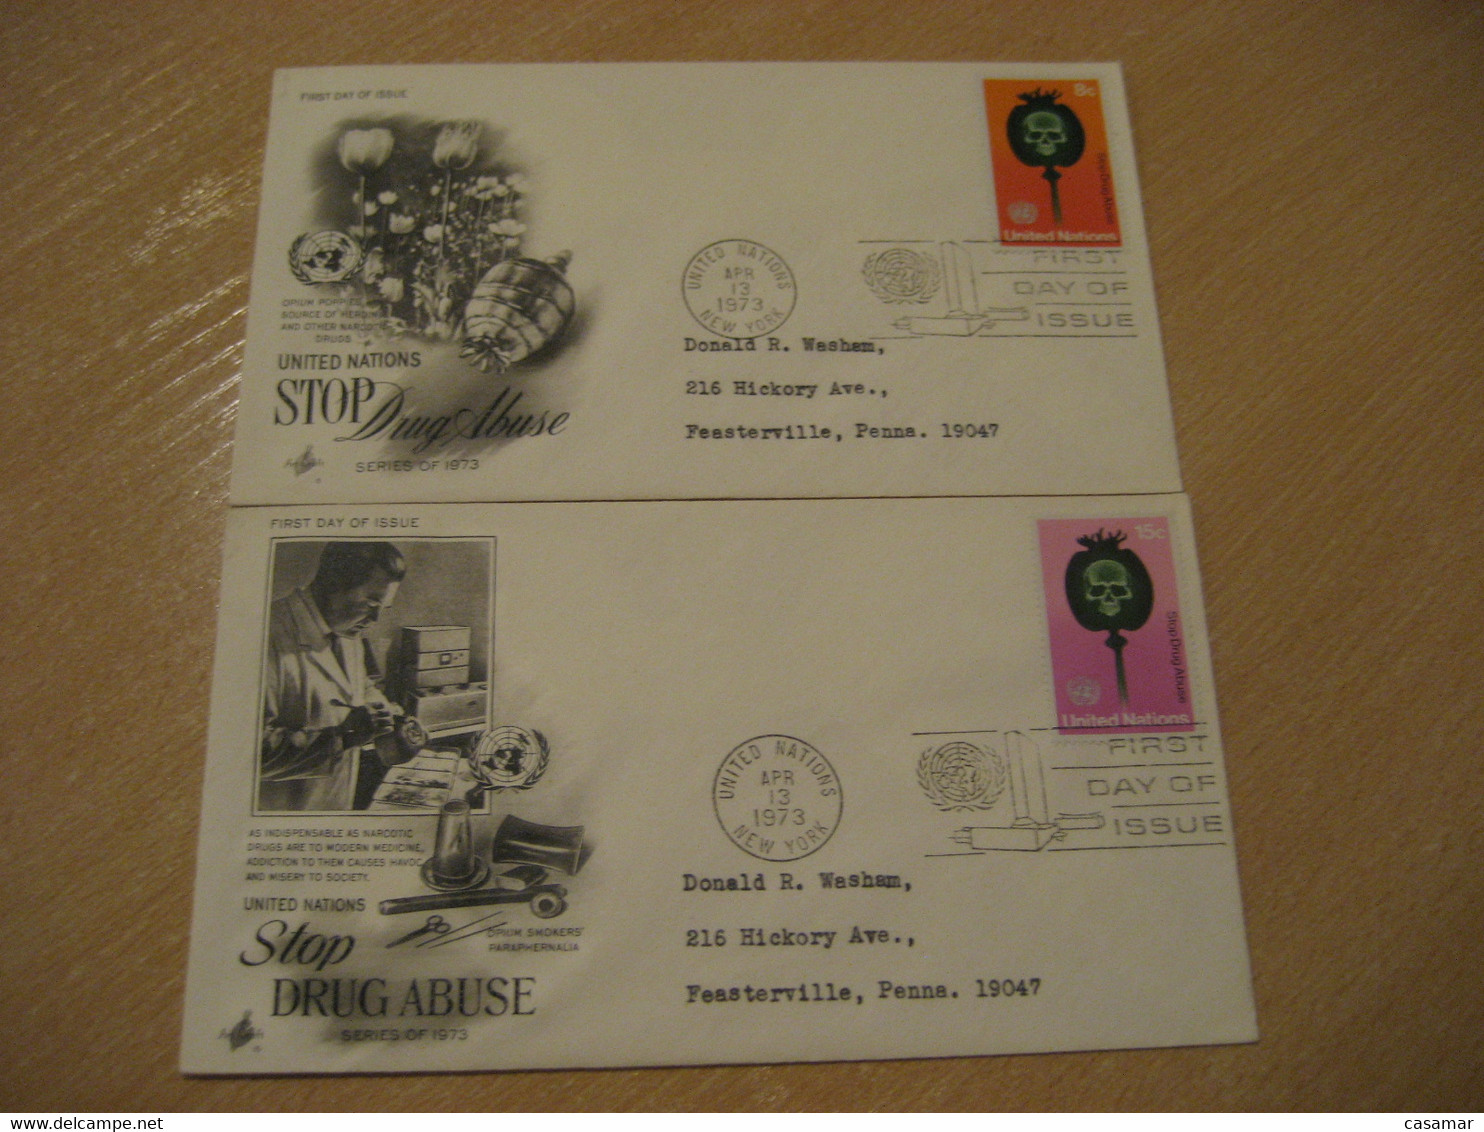 NEW YORK 1973 Stop Drug Abuse Narcotic Drugs 2 FDC Health Sante Cancel Cover UNITED NATIONS USA - Drugs